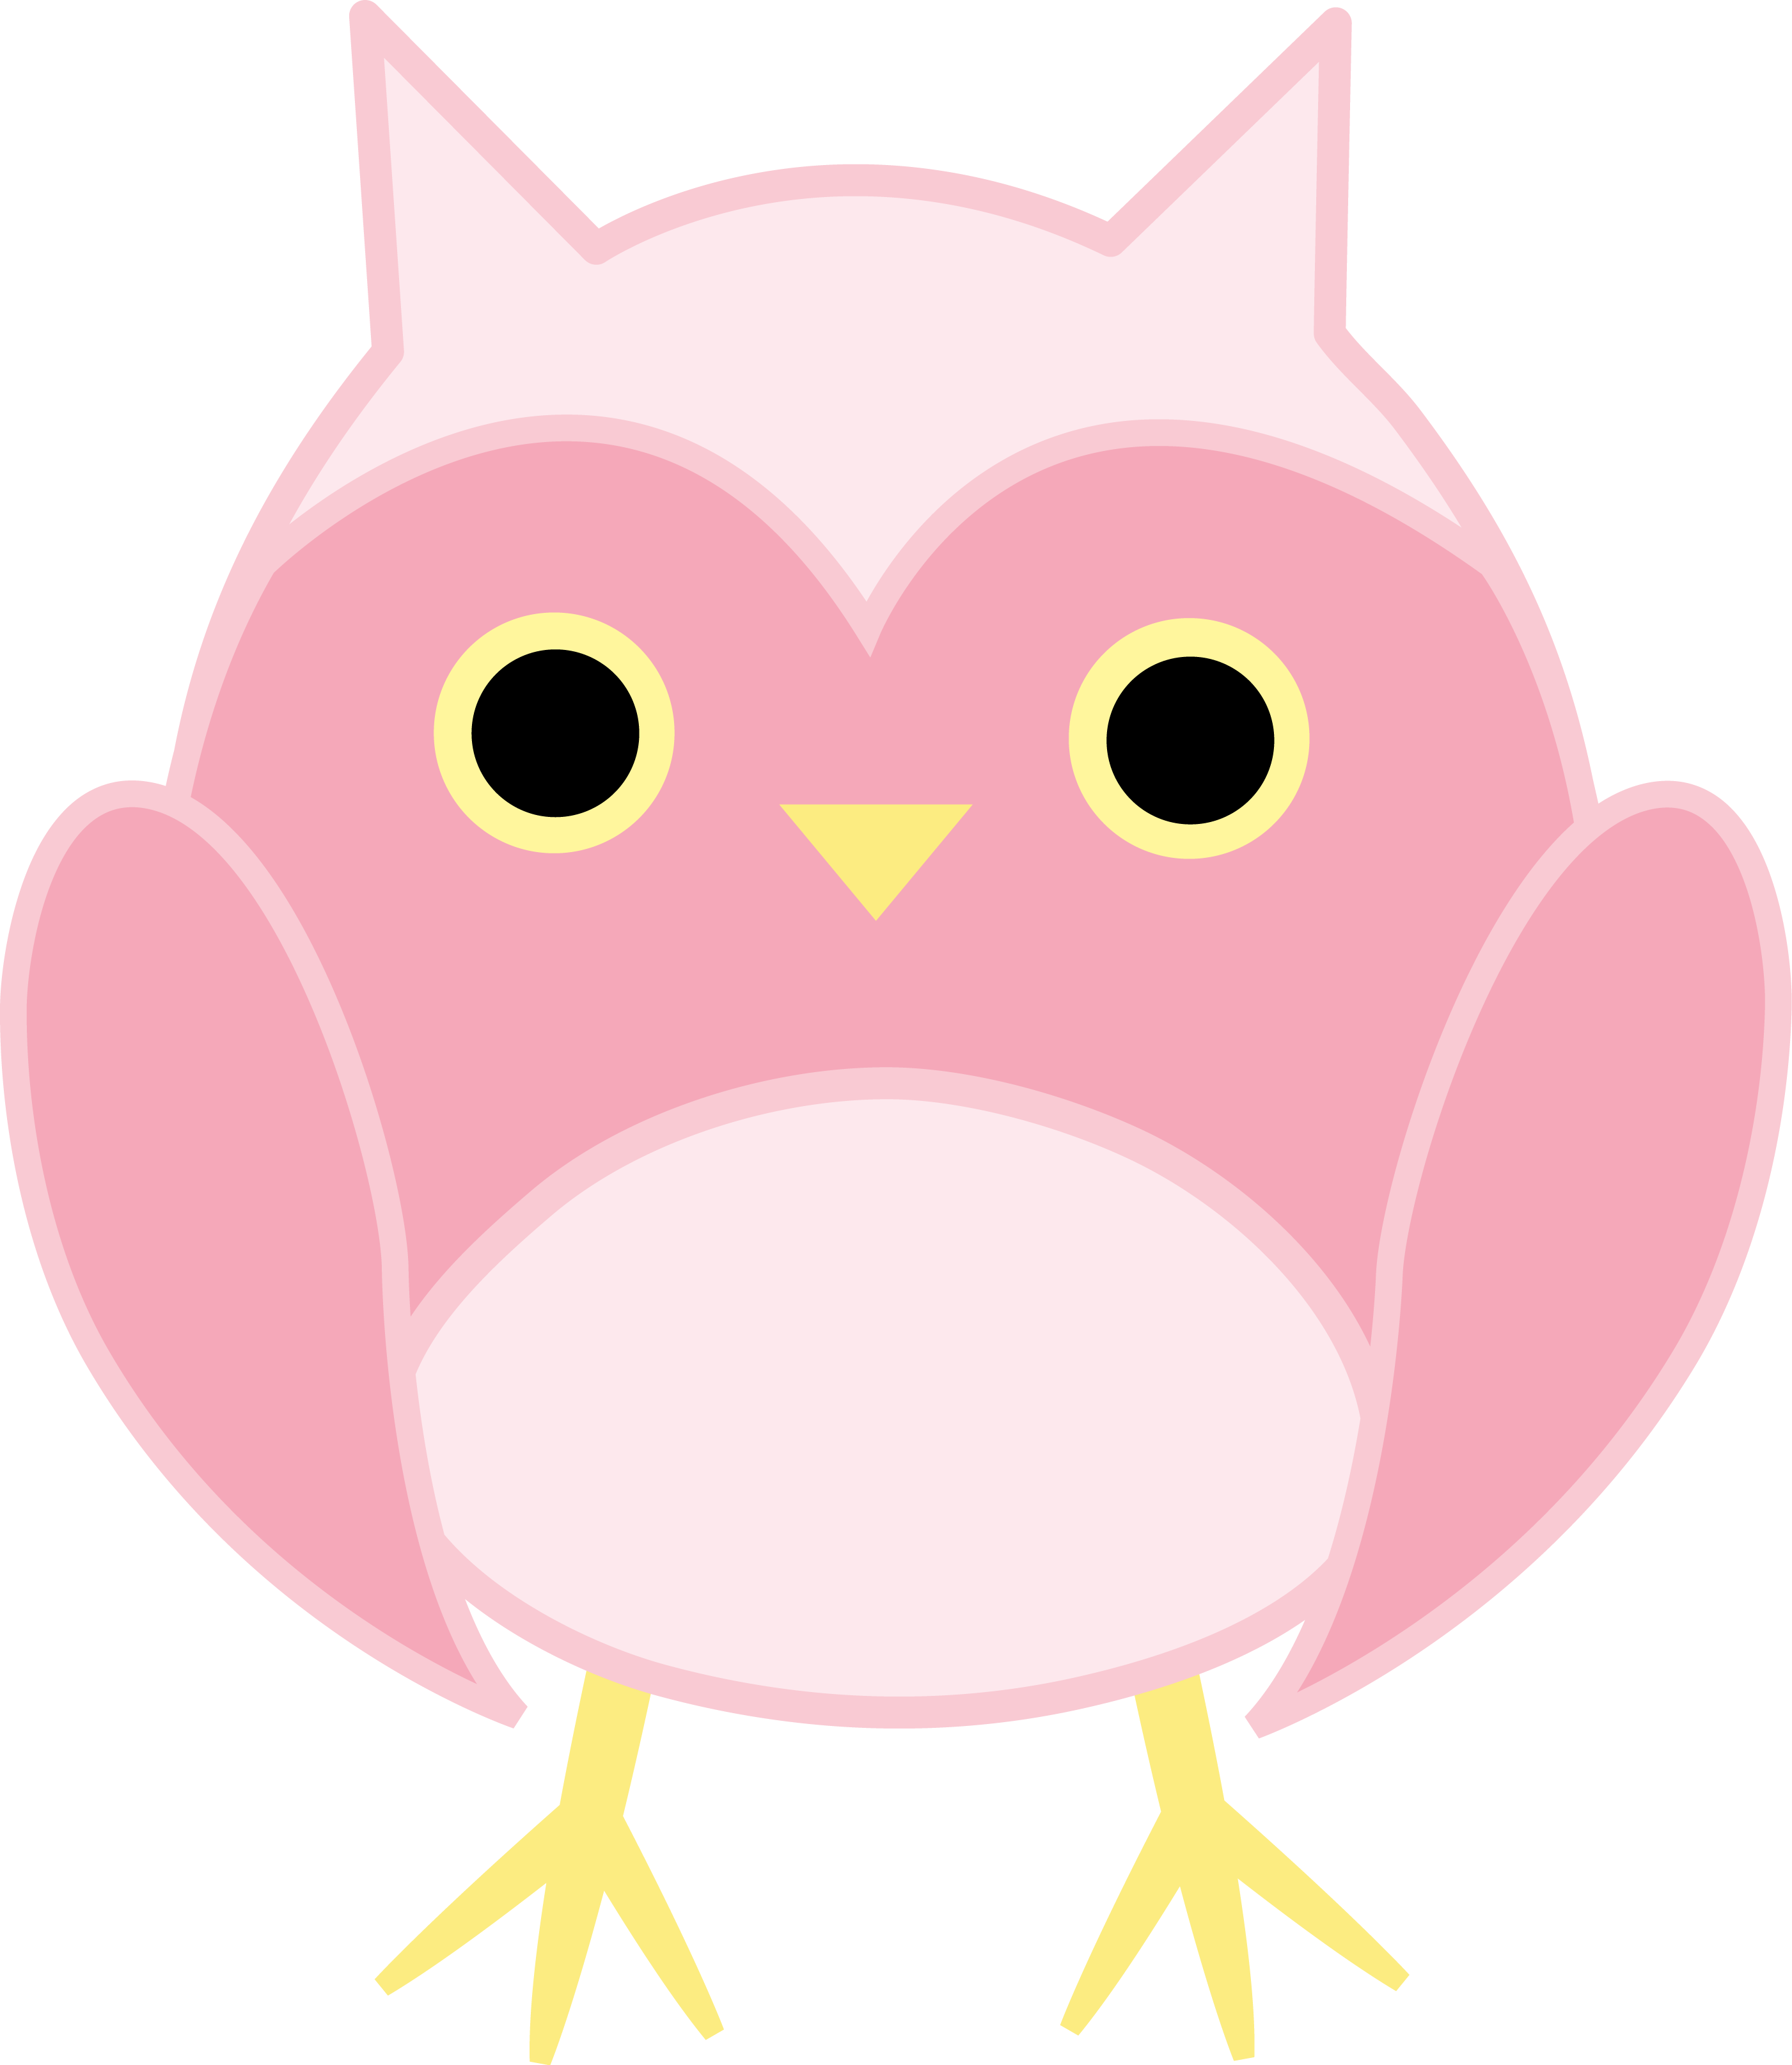 kite clipart pink